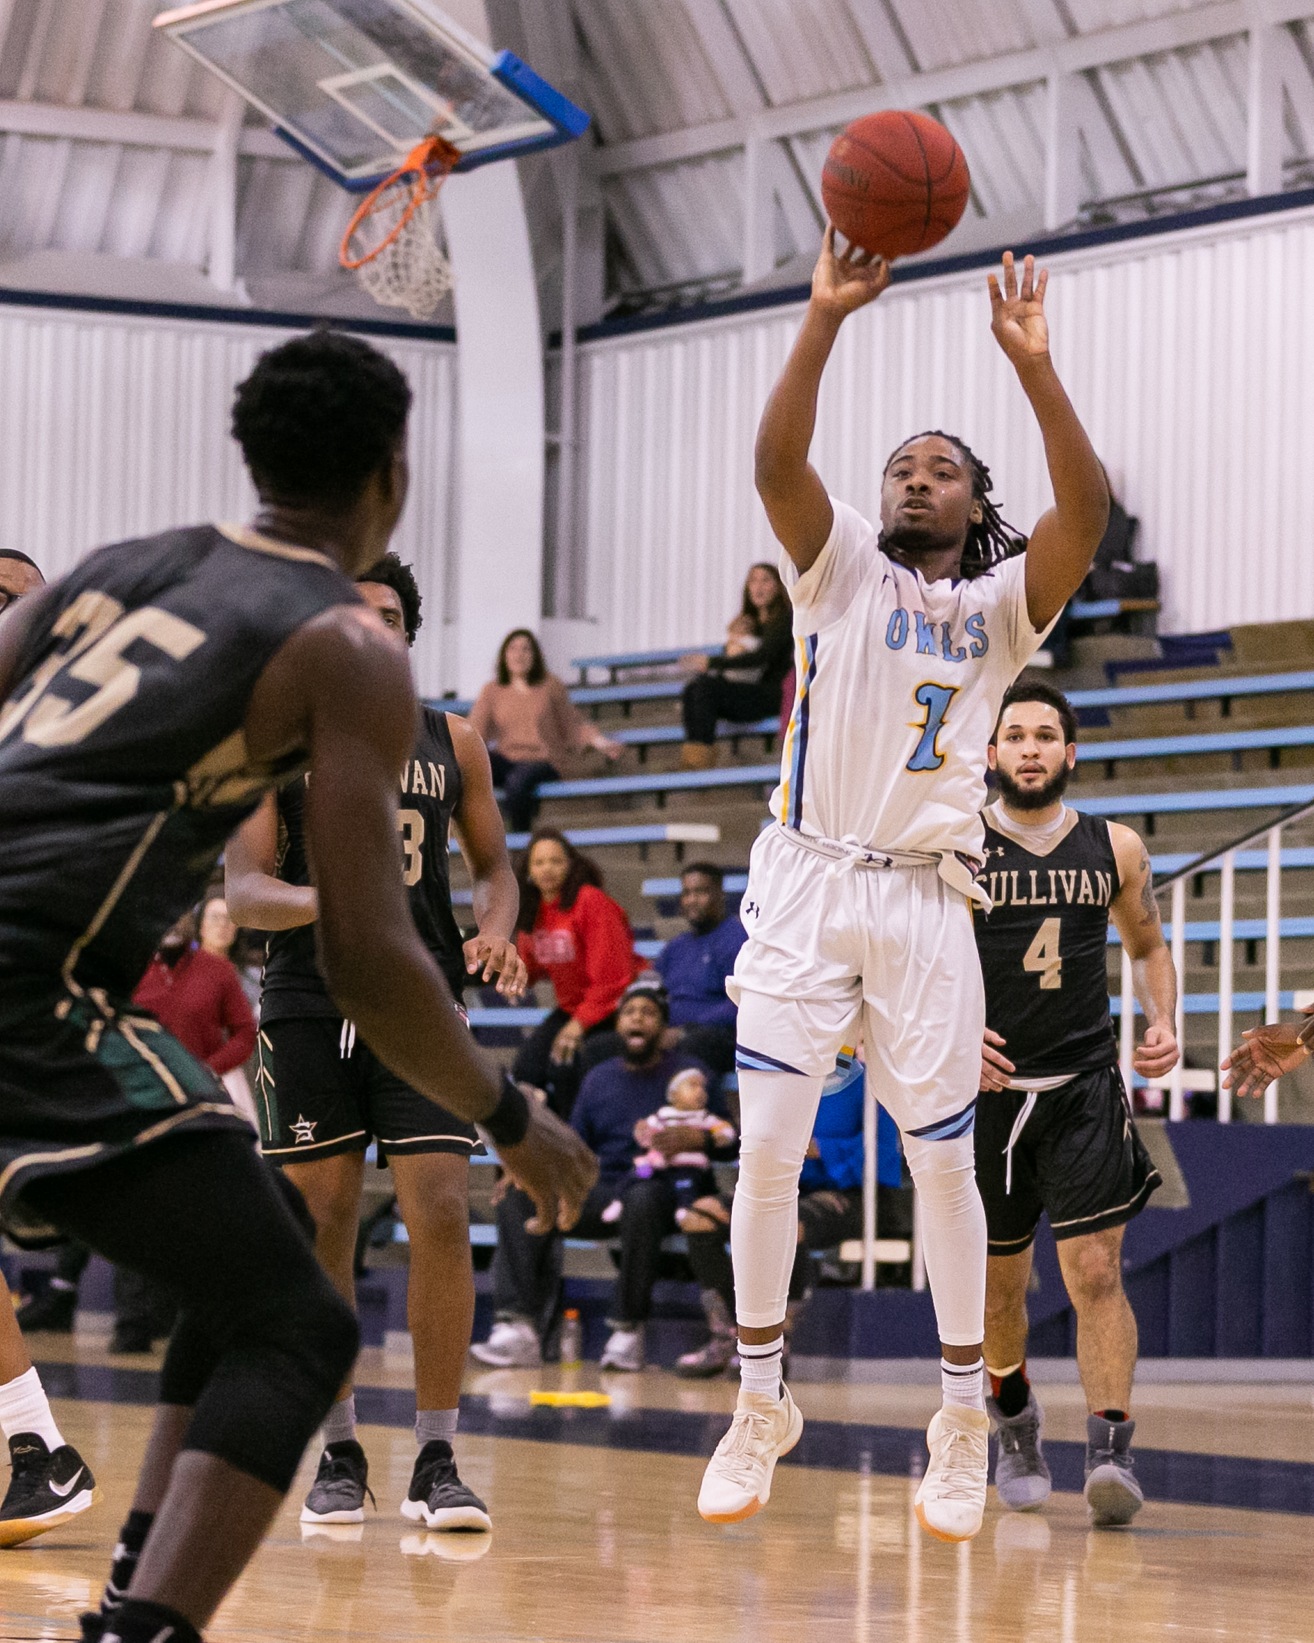 Men’s Basketball Bounces Back With Dominant Win Over Butler County